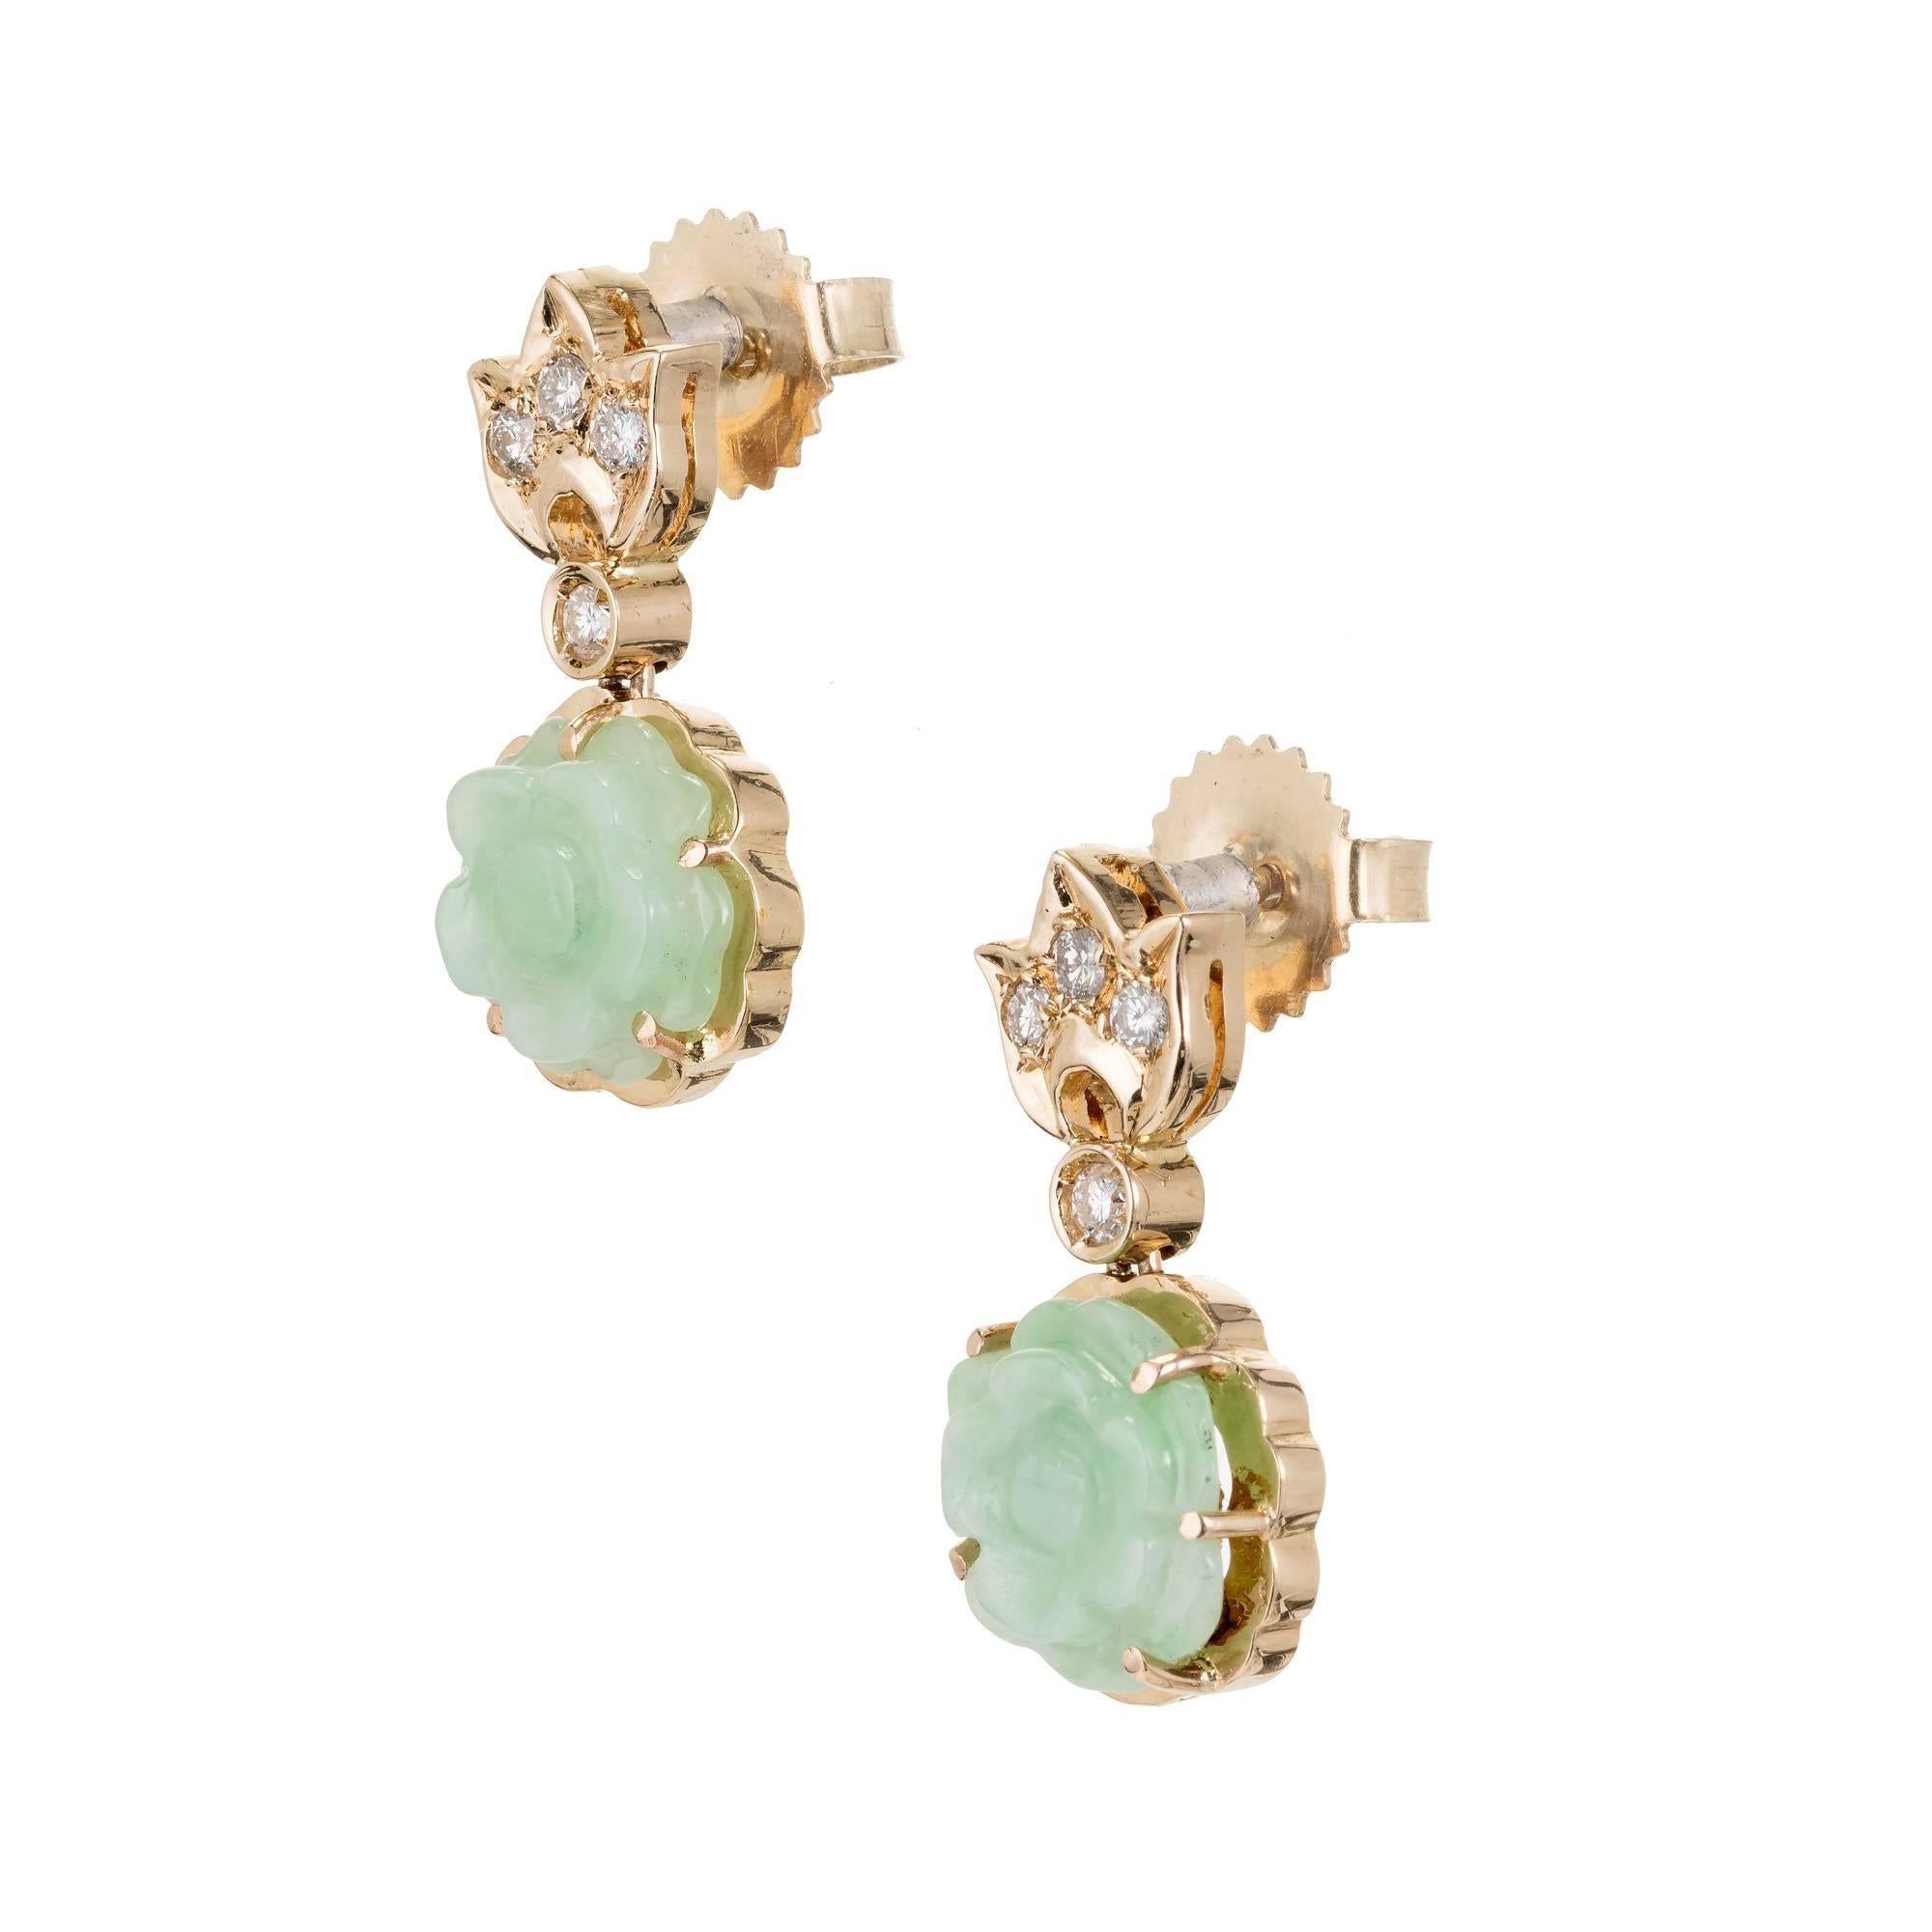 Natural carved Jadeite Jade light green flower dangle earrings in 14k yellow gold with sparkly Diamond accents. GIA certified.

2 carved light green translucent Jadeite Jade, 8.86 x 8.57 x 2.76mm, GIA certificate #2181685907
8 full cut Diamonds,